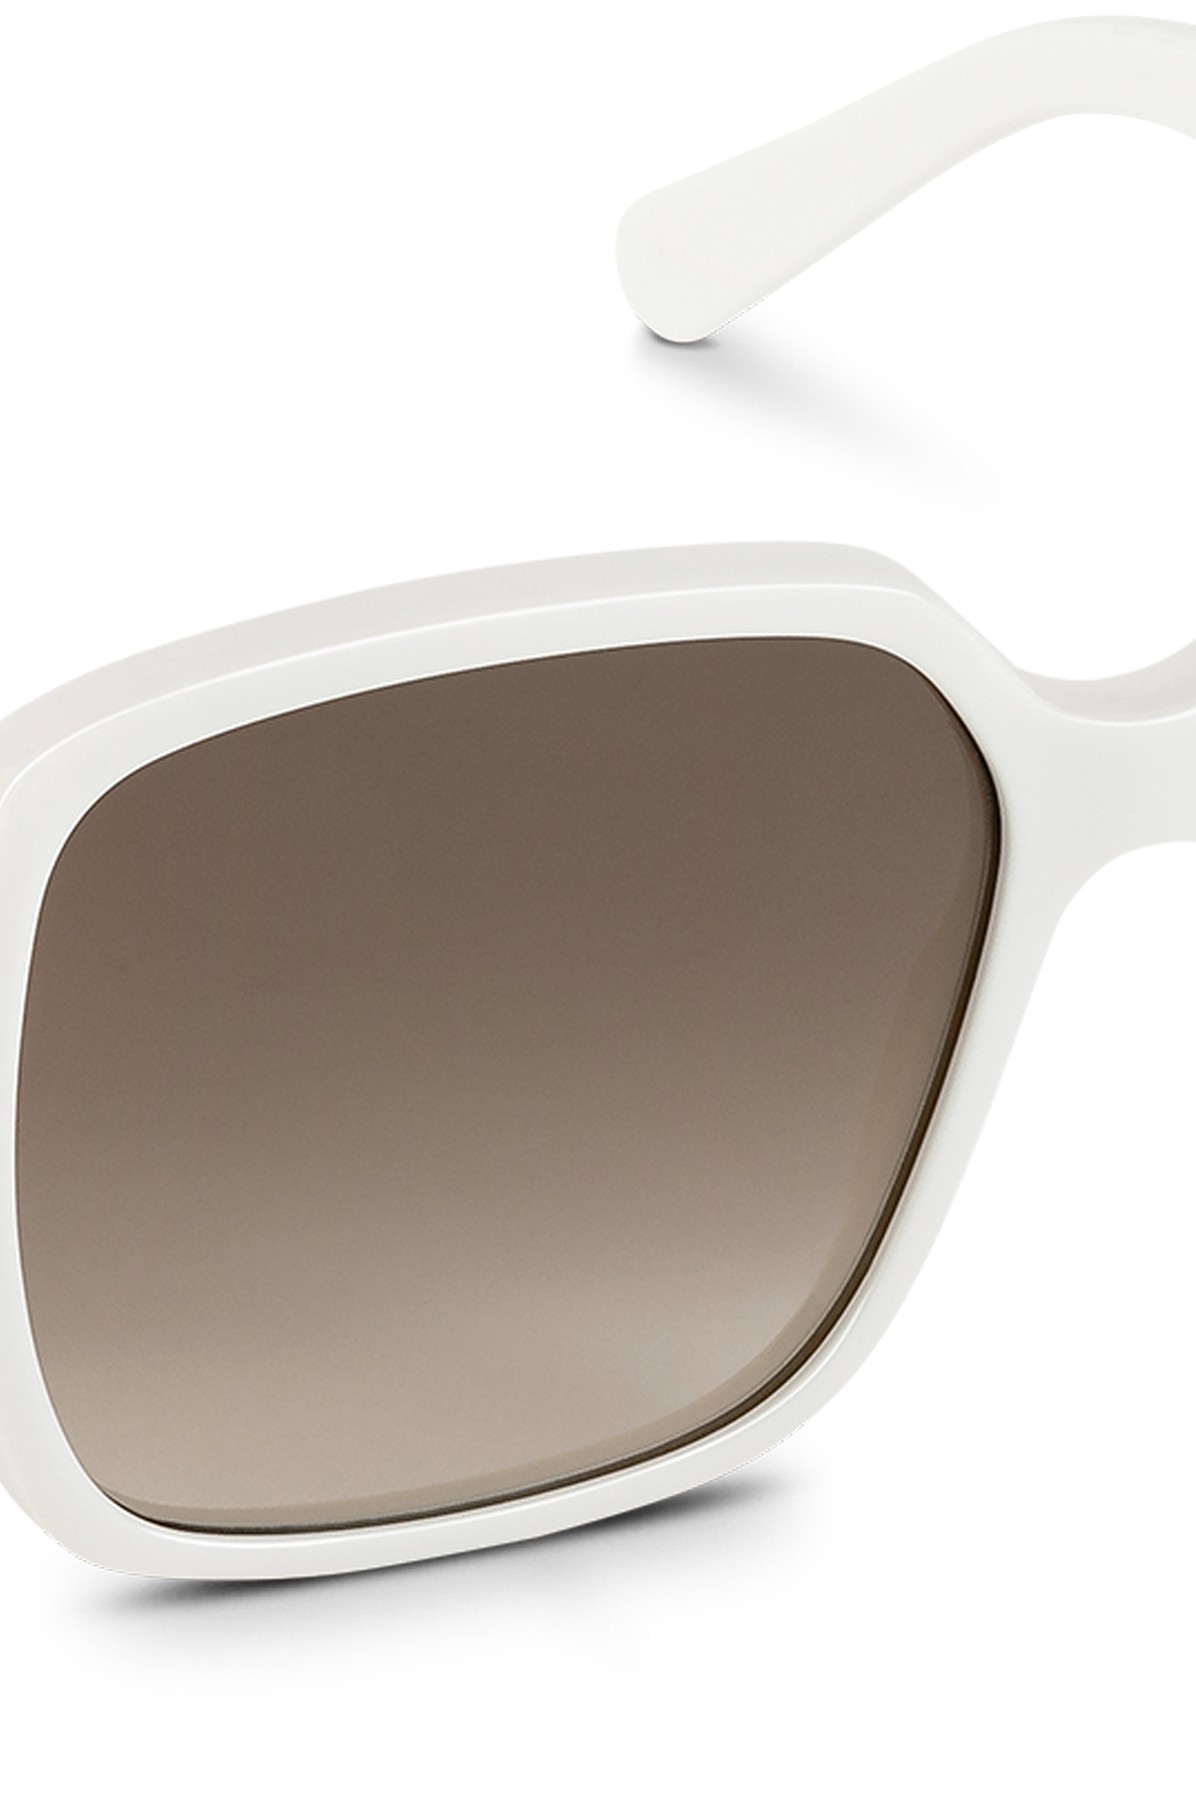 Louis Vuitton My LV Flower Square Sunglasses, White, One Size